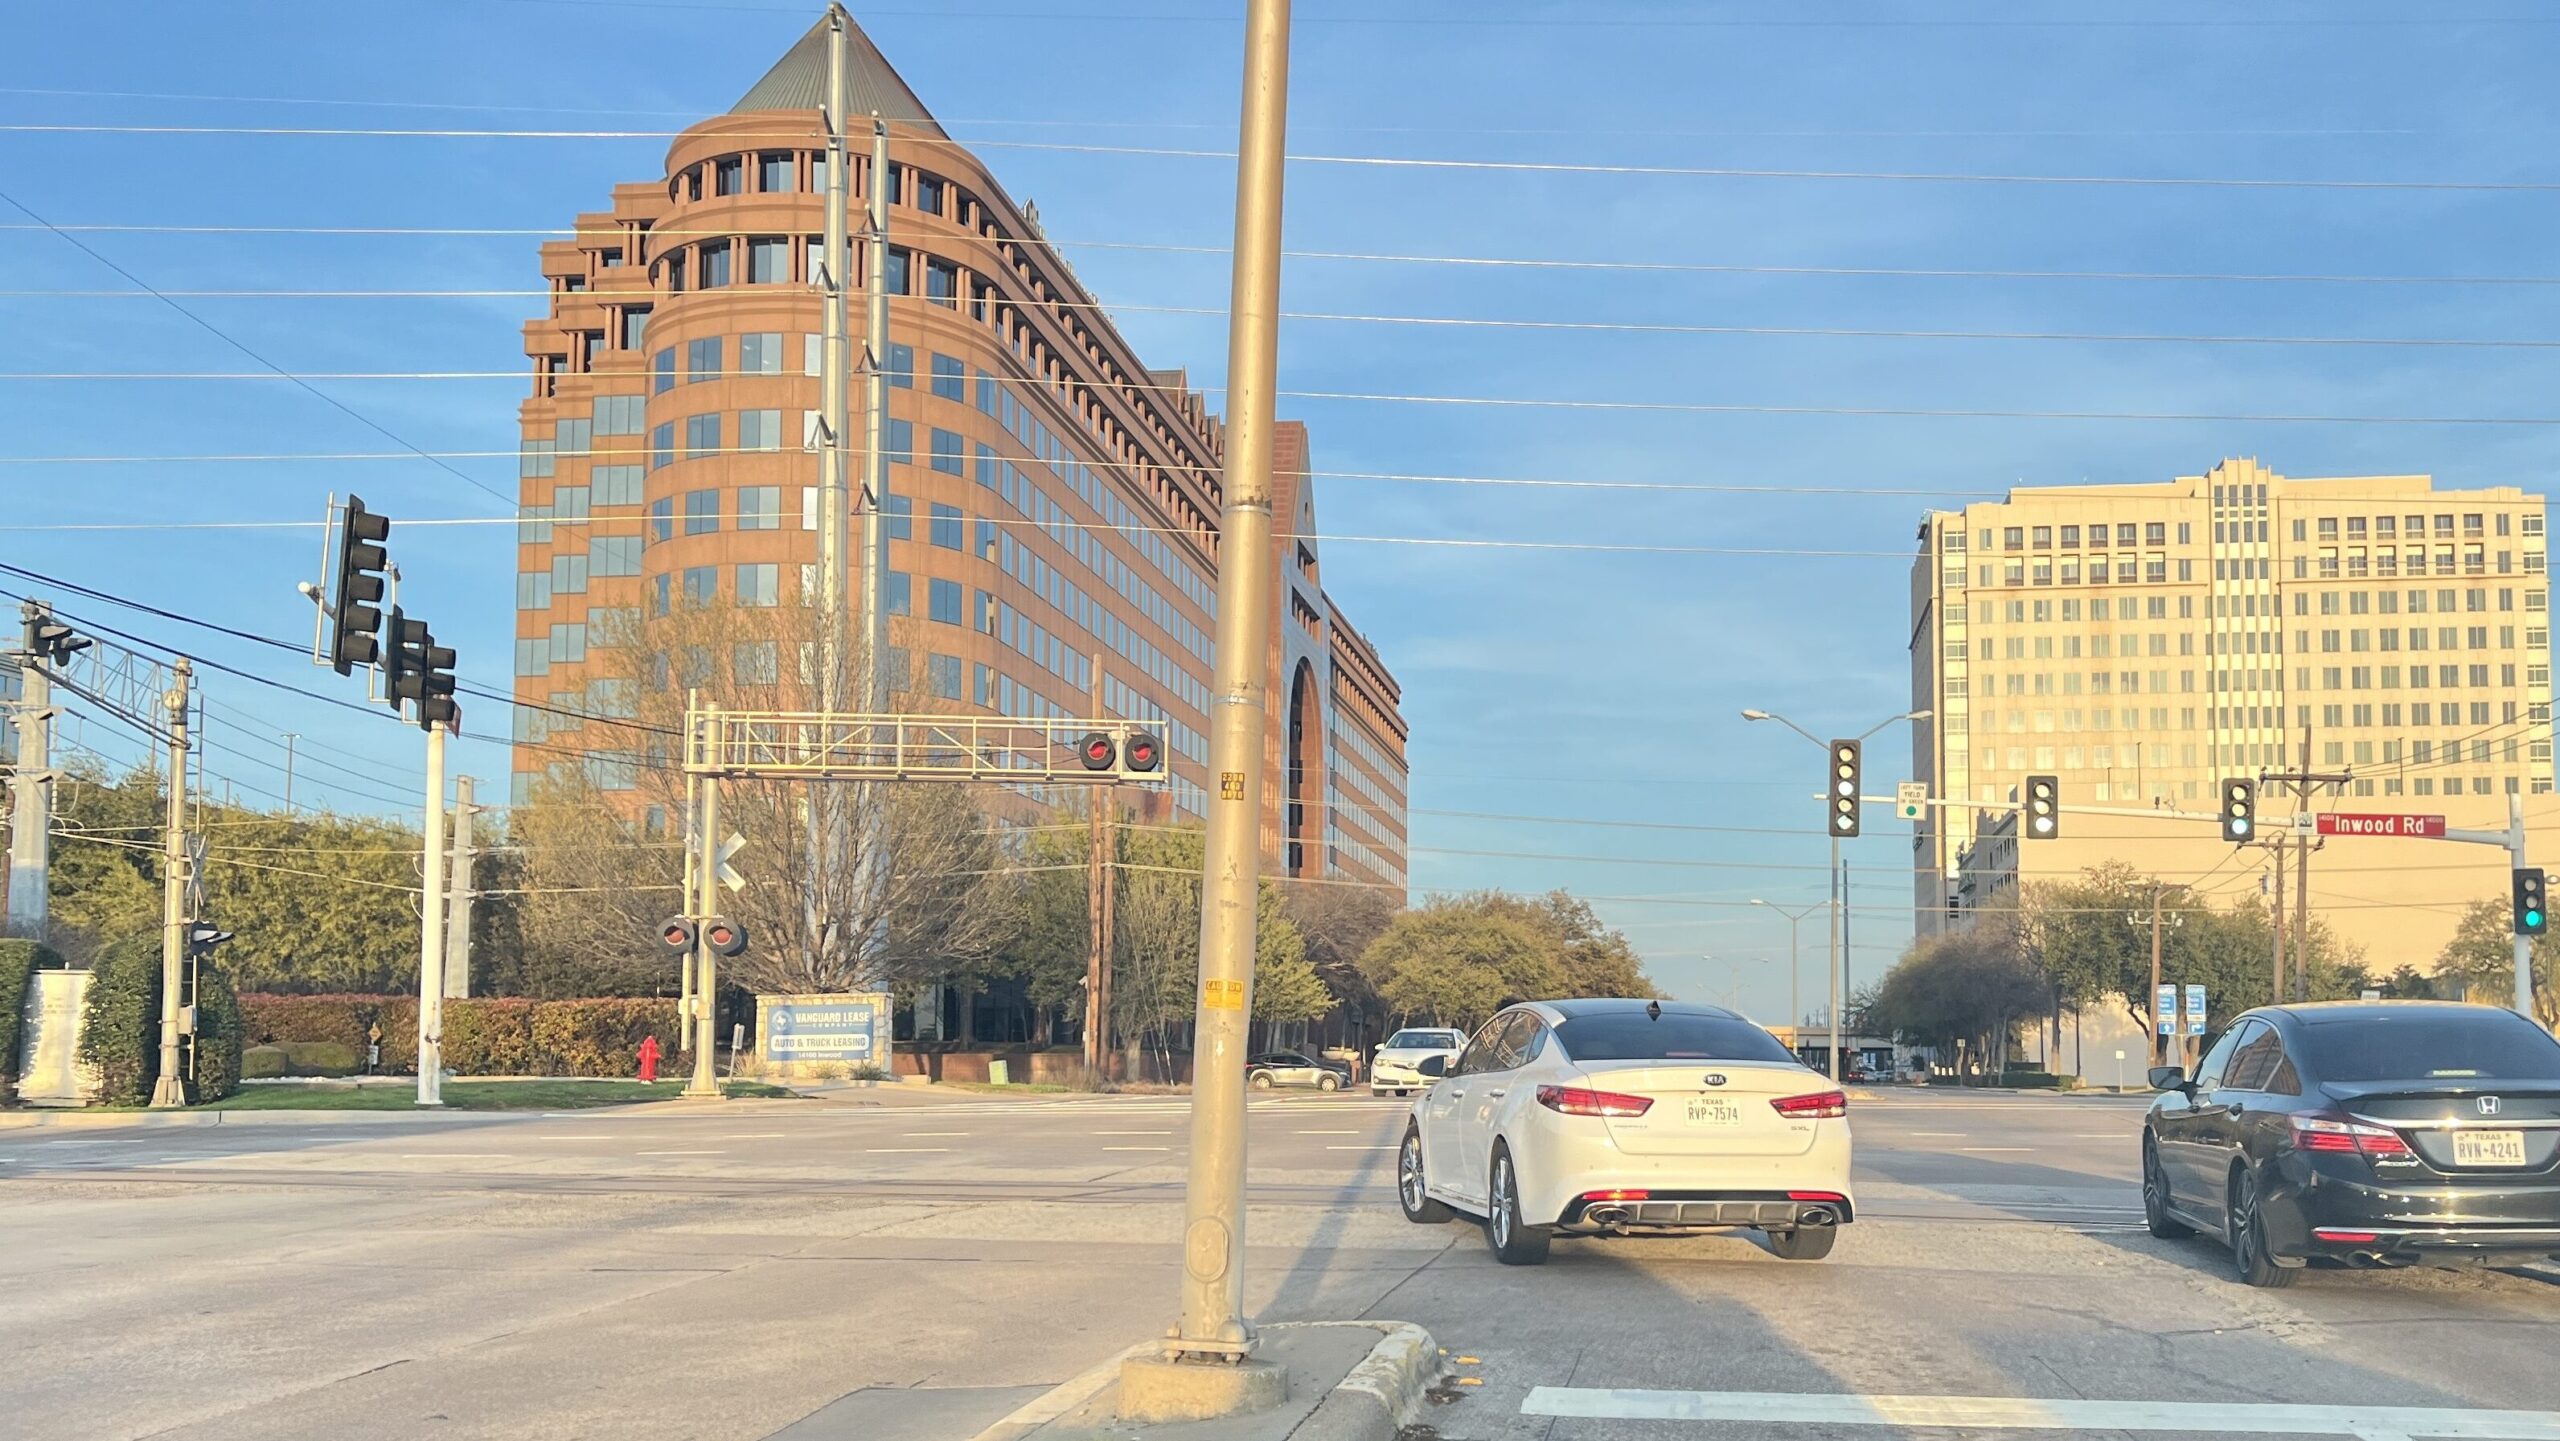 Eastbound on Alpha Rd. at the Intersection of Alpha Rd. & Inwood Rd. (Dallas Pkwy)